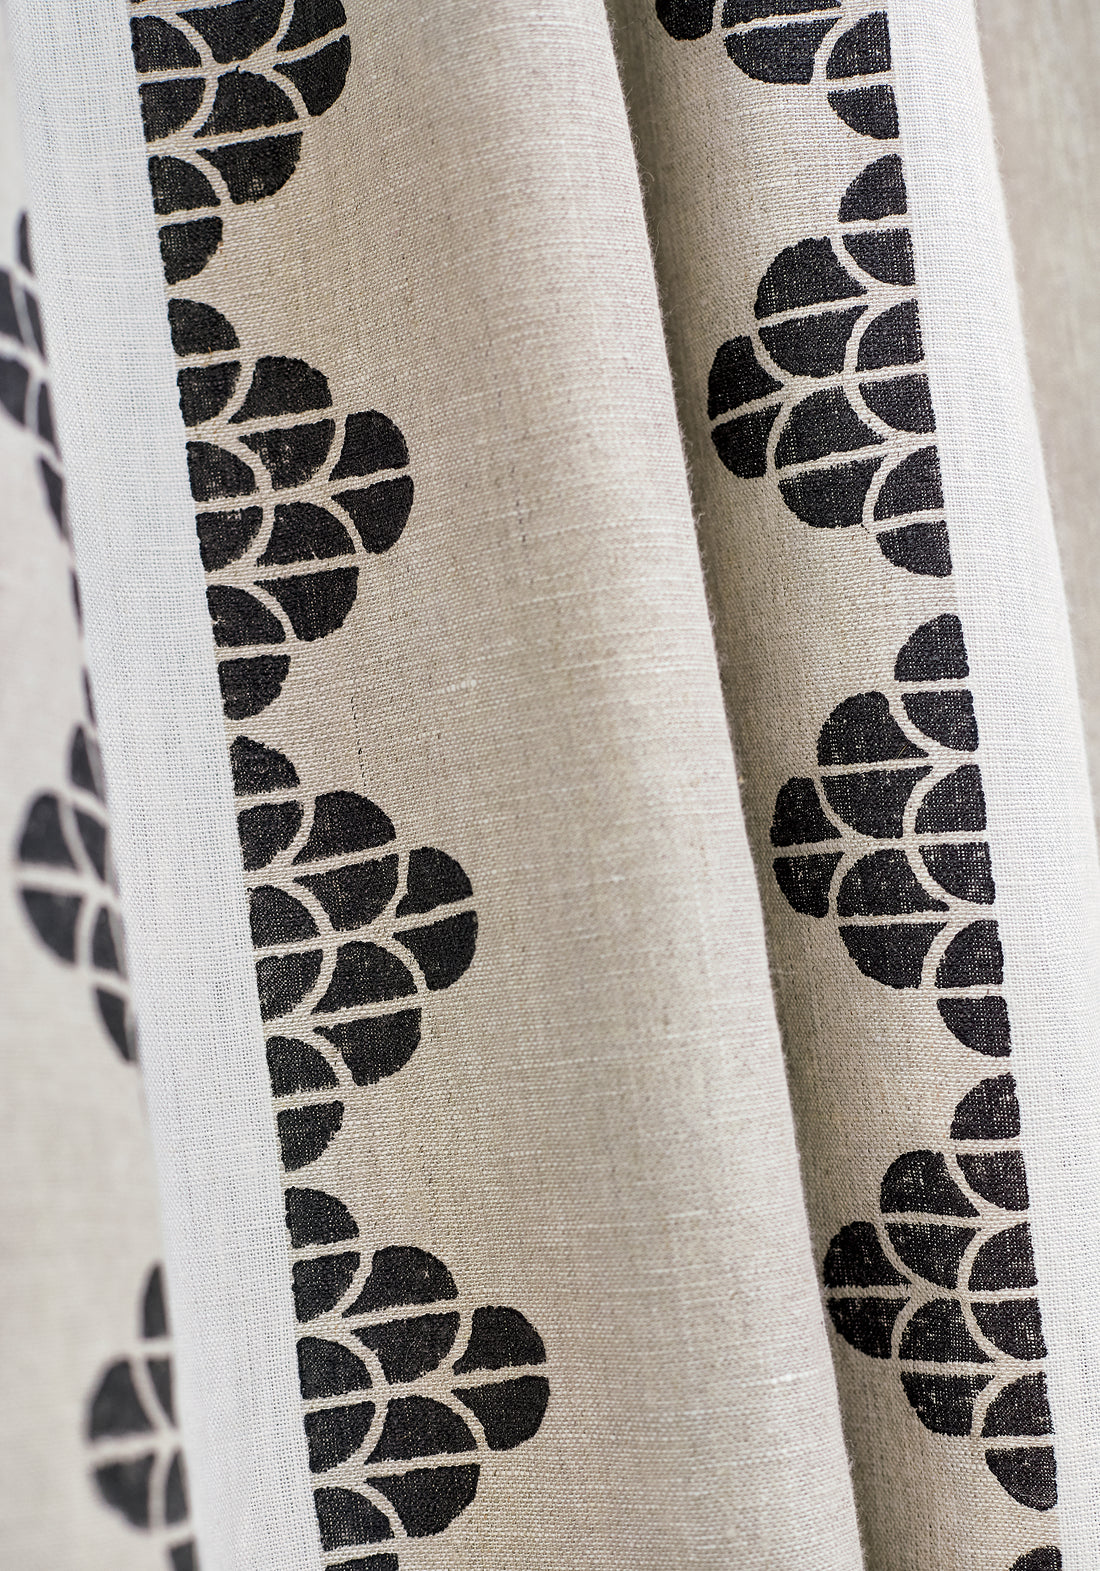 Detailed Dhara Stripe printed fabric in beige and black color, pattern number F92939 of the Thibaut Paramount collection